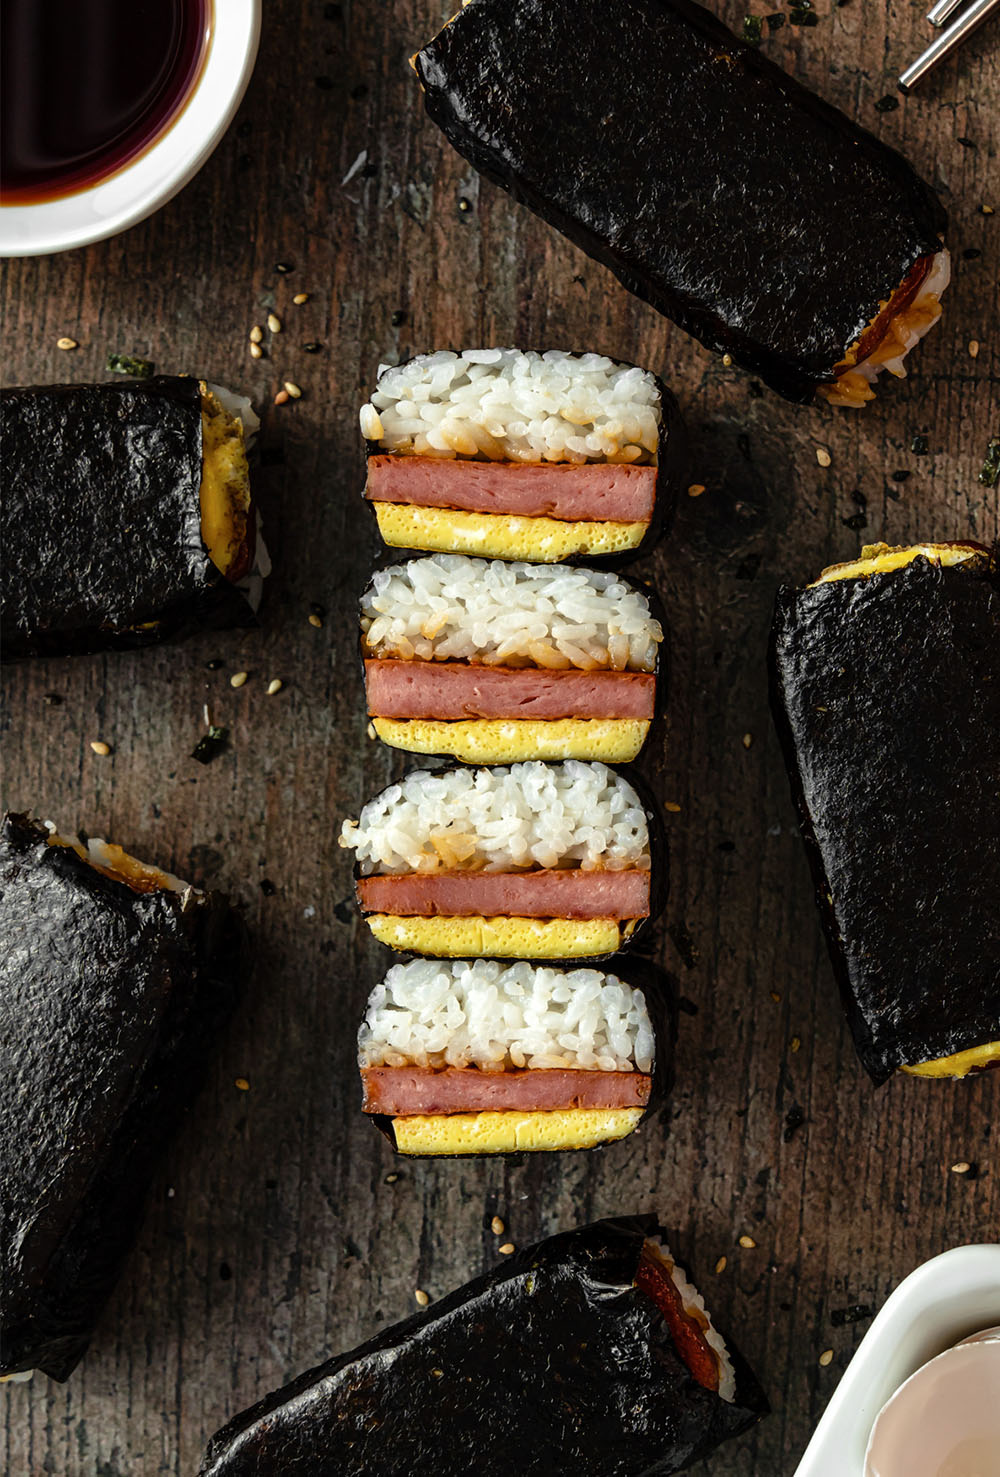 https://balancewithjess.com/wp-content/uploads/2022/02/Spam-Musubi-with-Egg-Feat.jpg